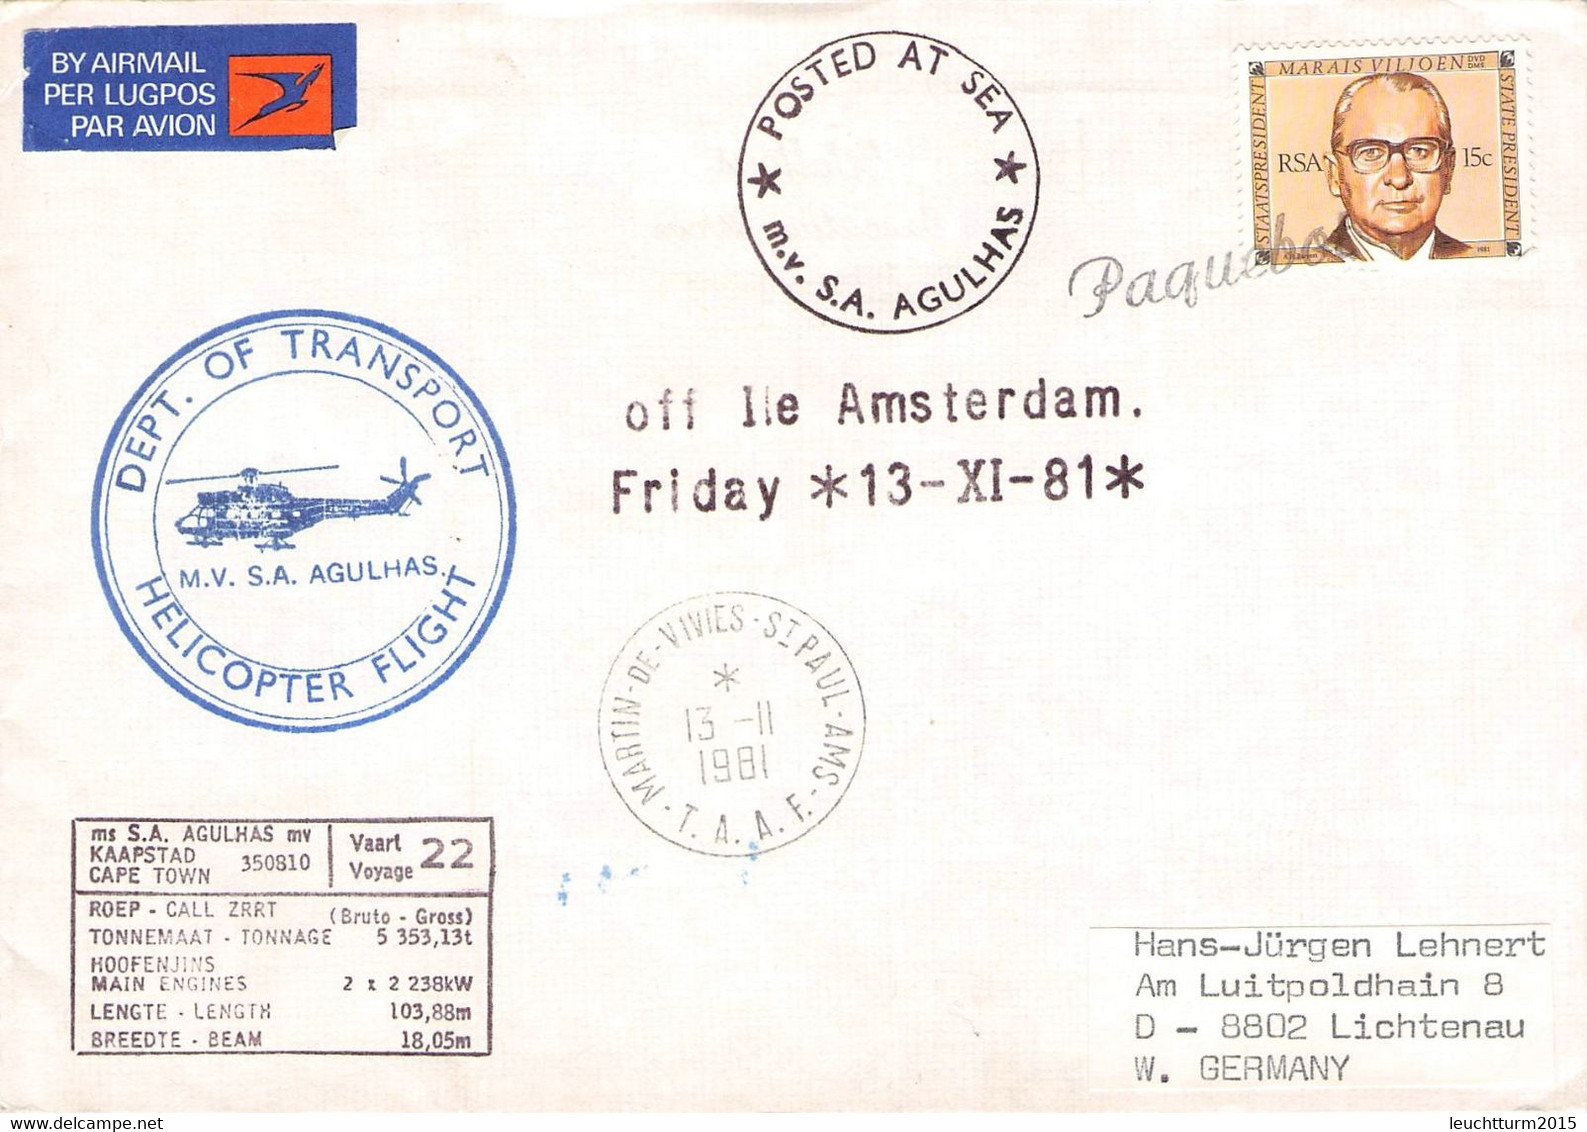 SOUTH AFRICA - POSTED AT SEA MV S.A. AGULHAS 1981 > GERMANY / ZM275 - Storia Postale